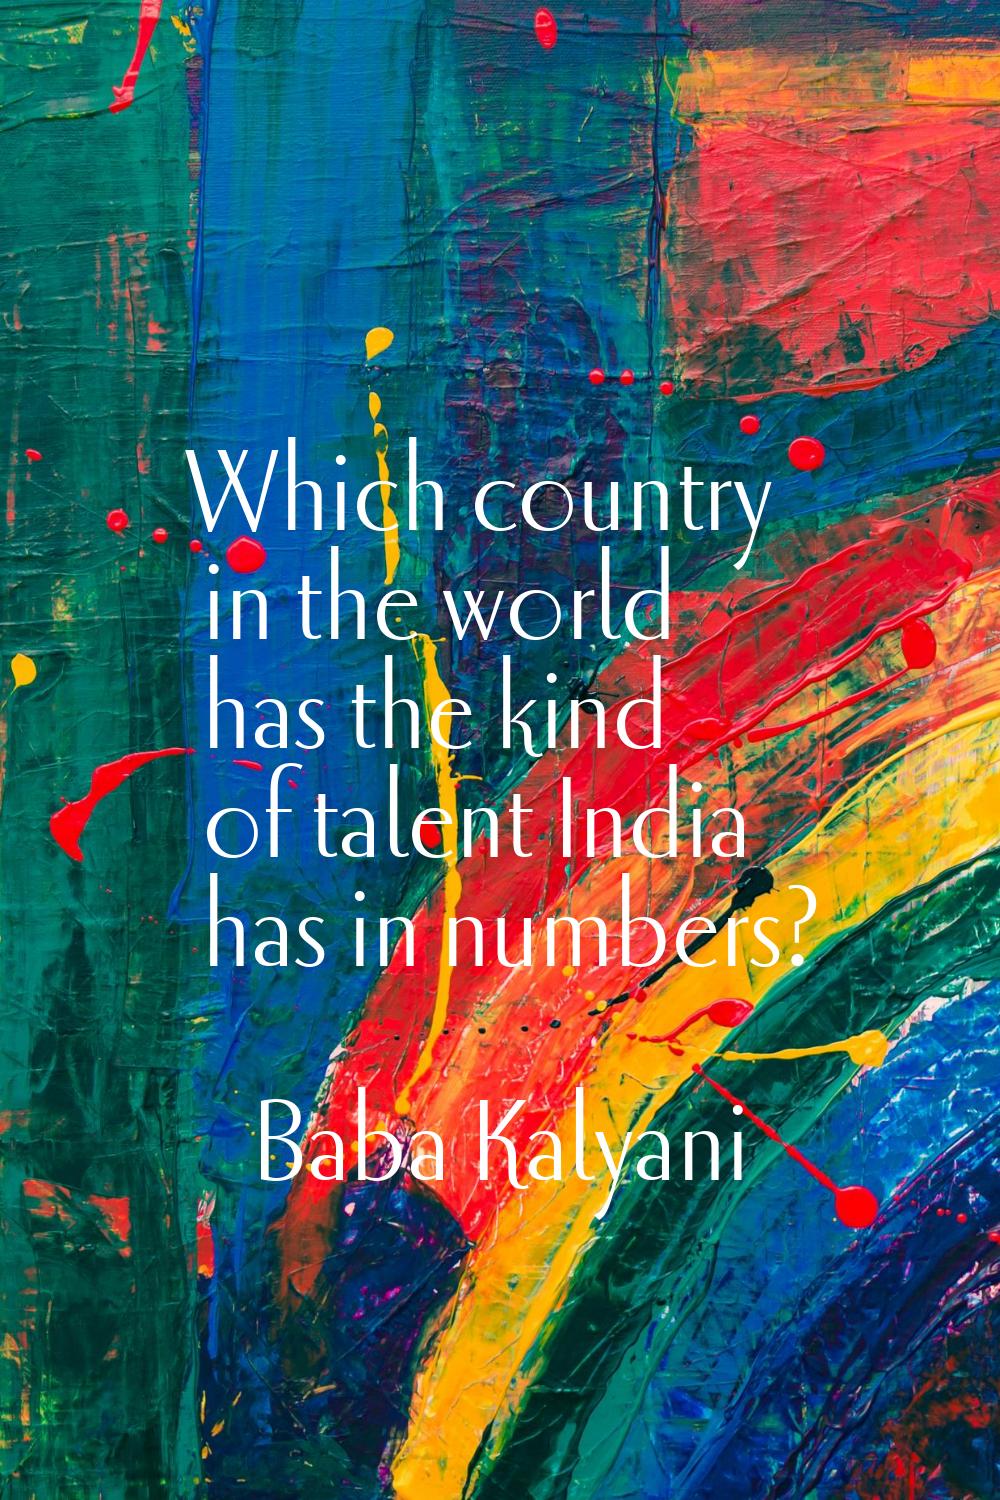 Which country in the world has the kind of talent India has in numbers?